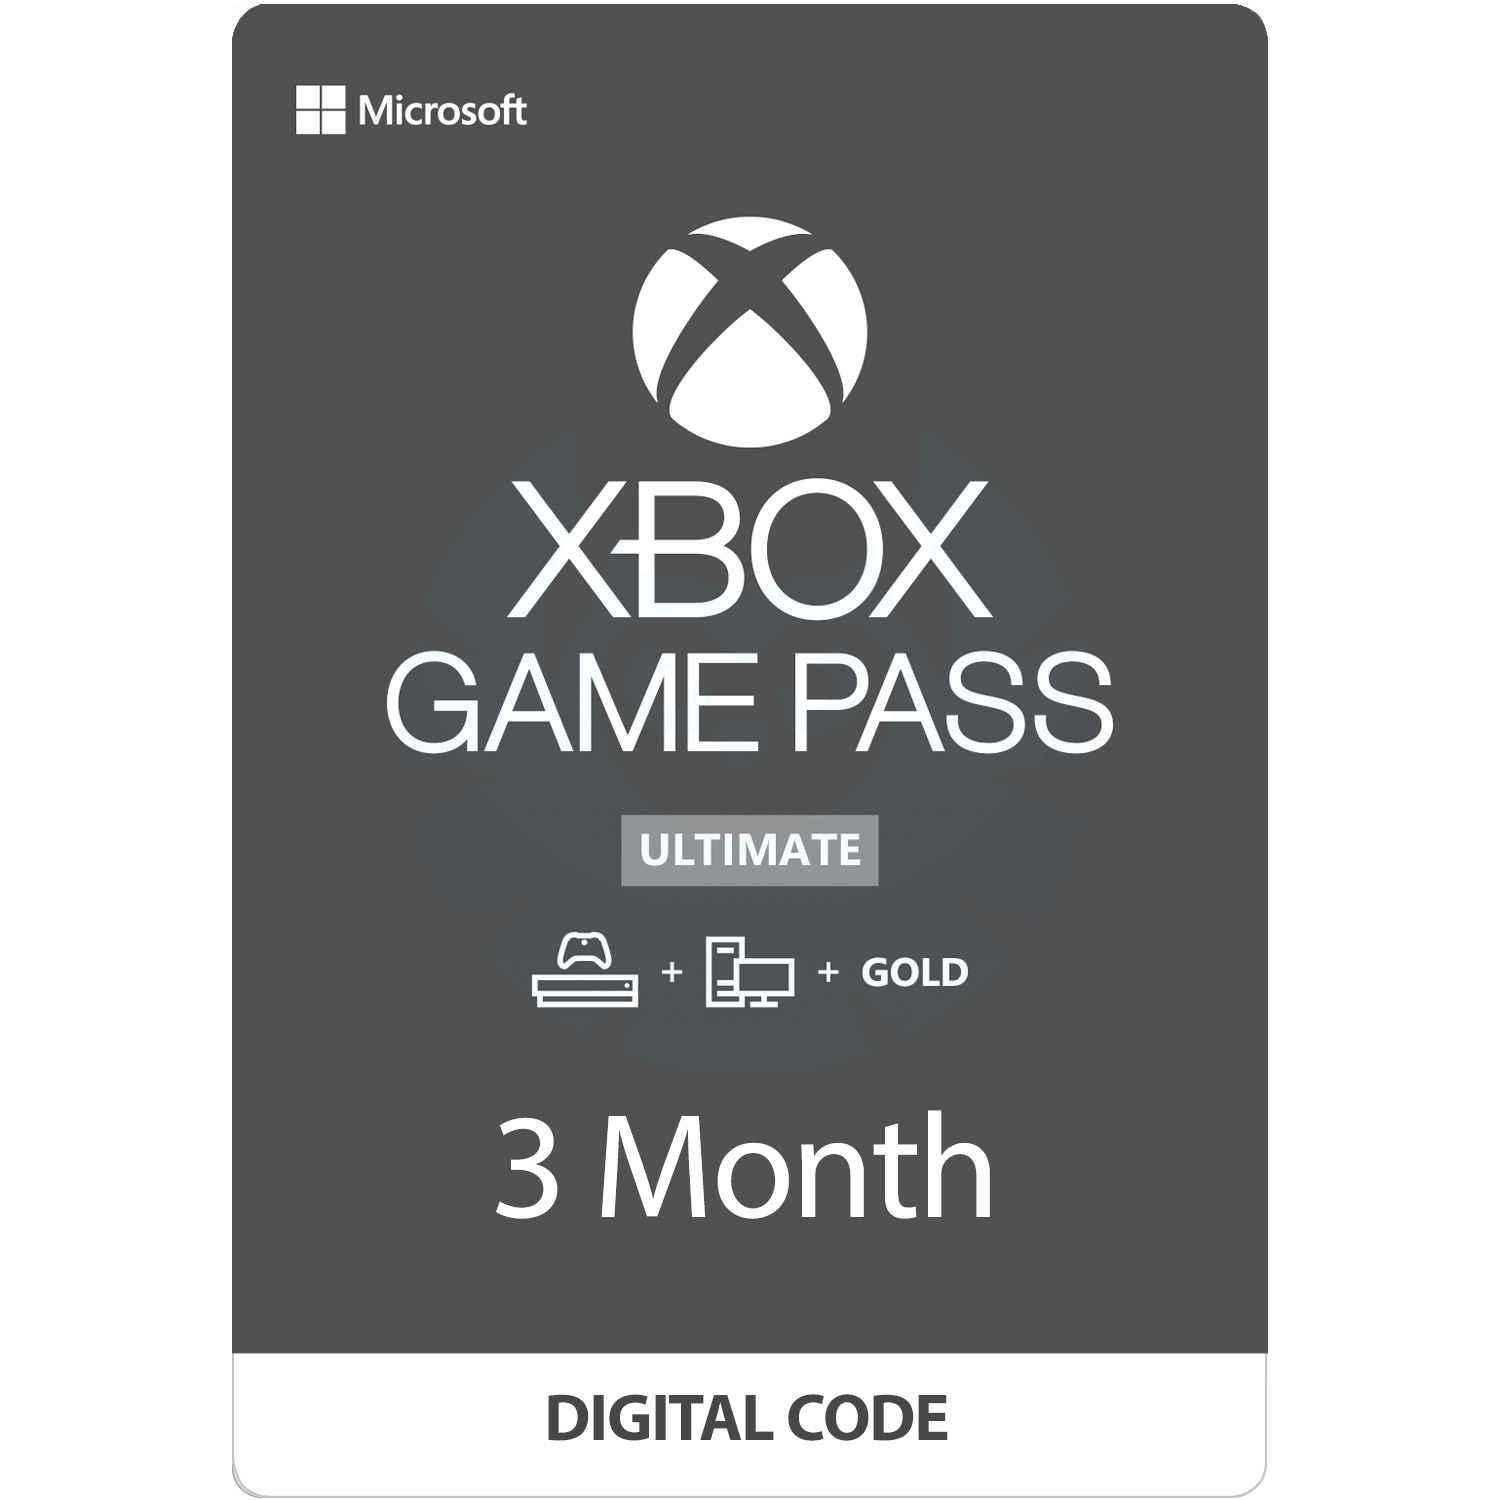 Cheapest Xbox Game Pass 6 months TURKEY - Global Activation in 4 Steps